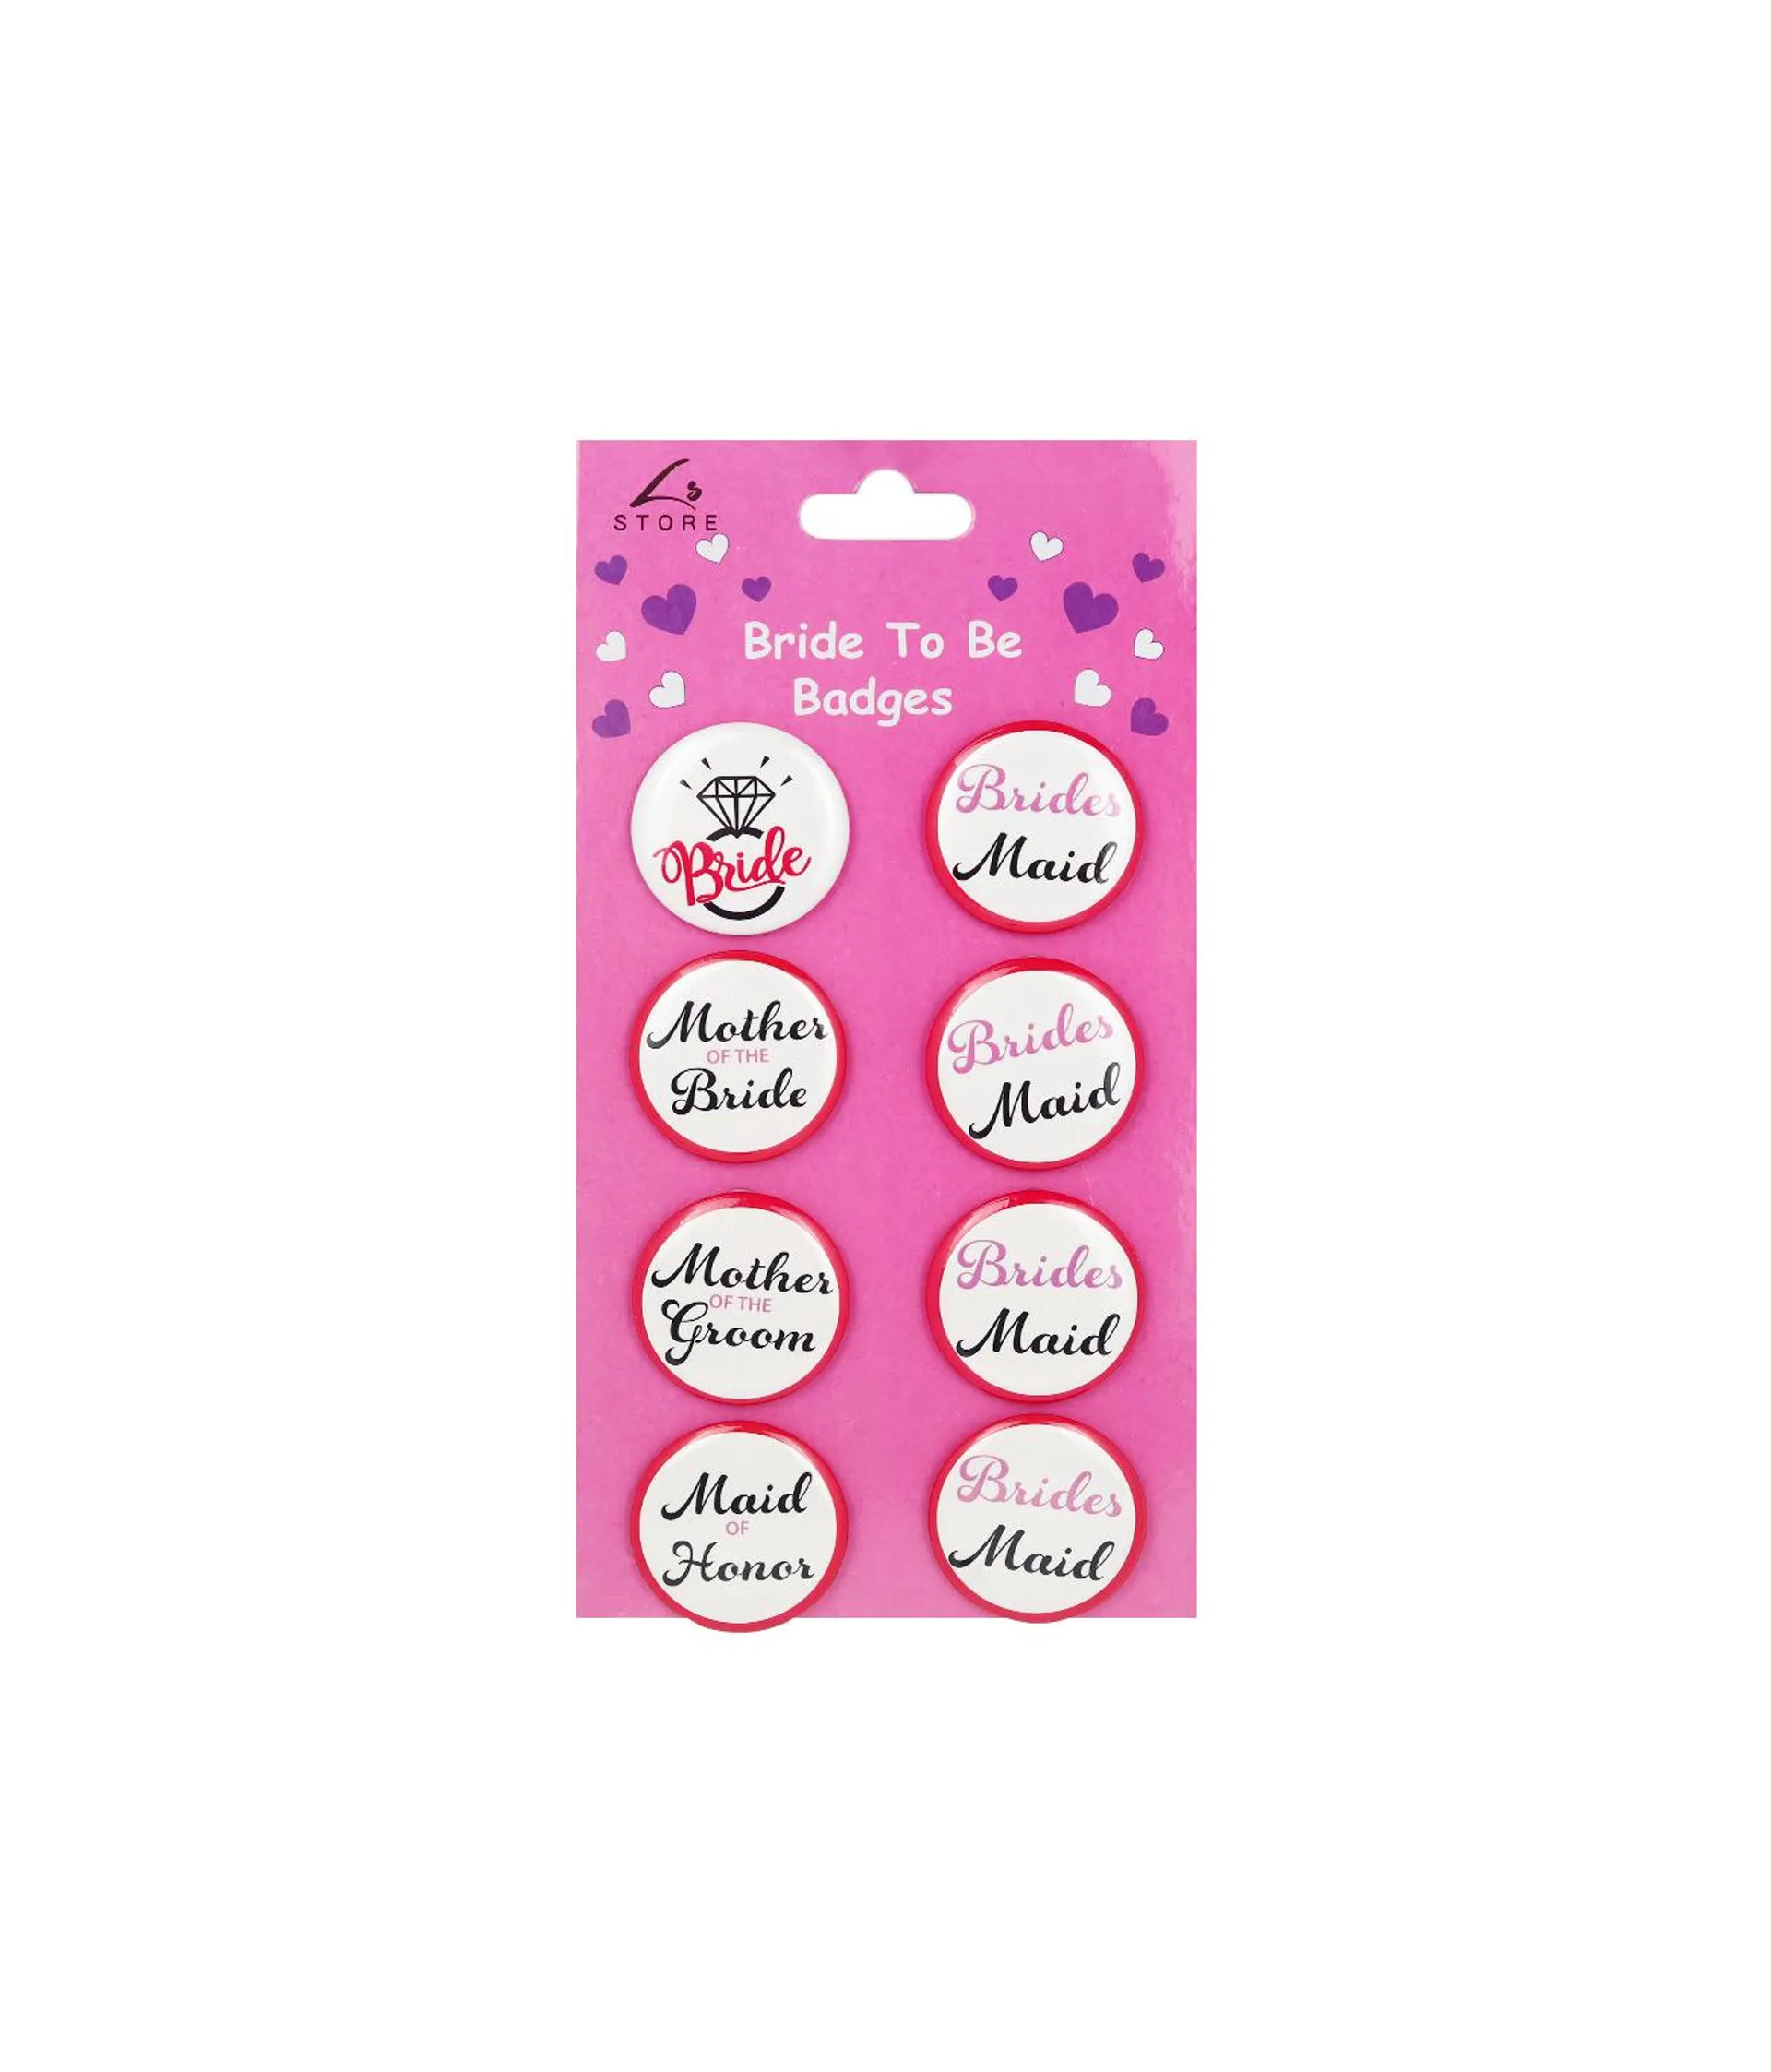 Bride To Be Badges 8pk